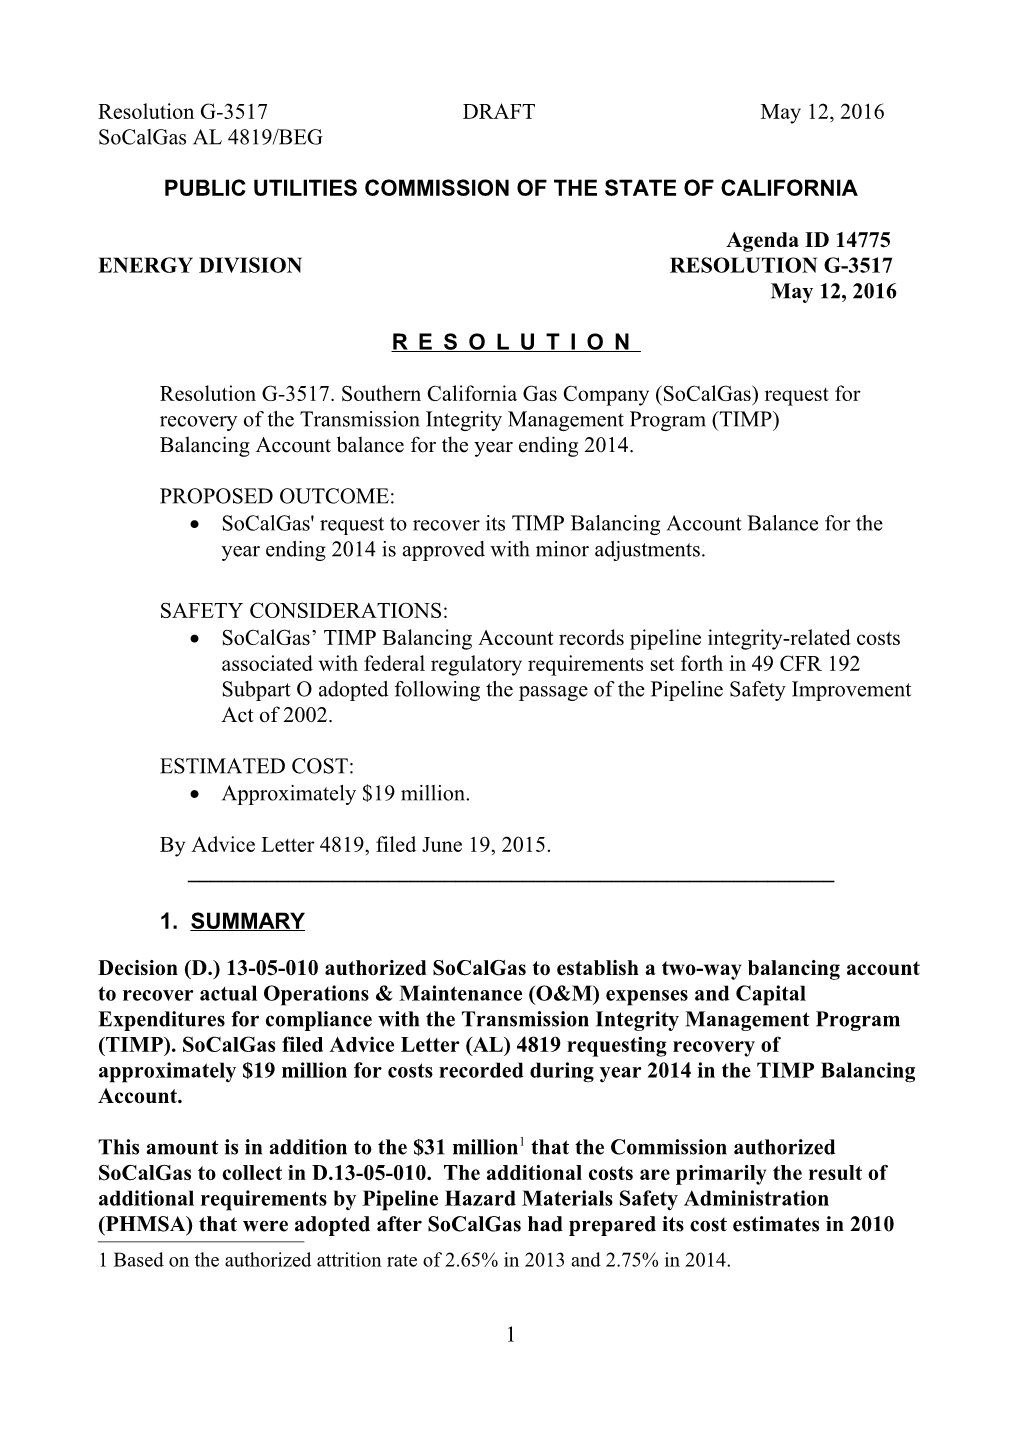 Public Utilities Commission of the State of California s91